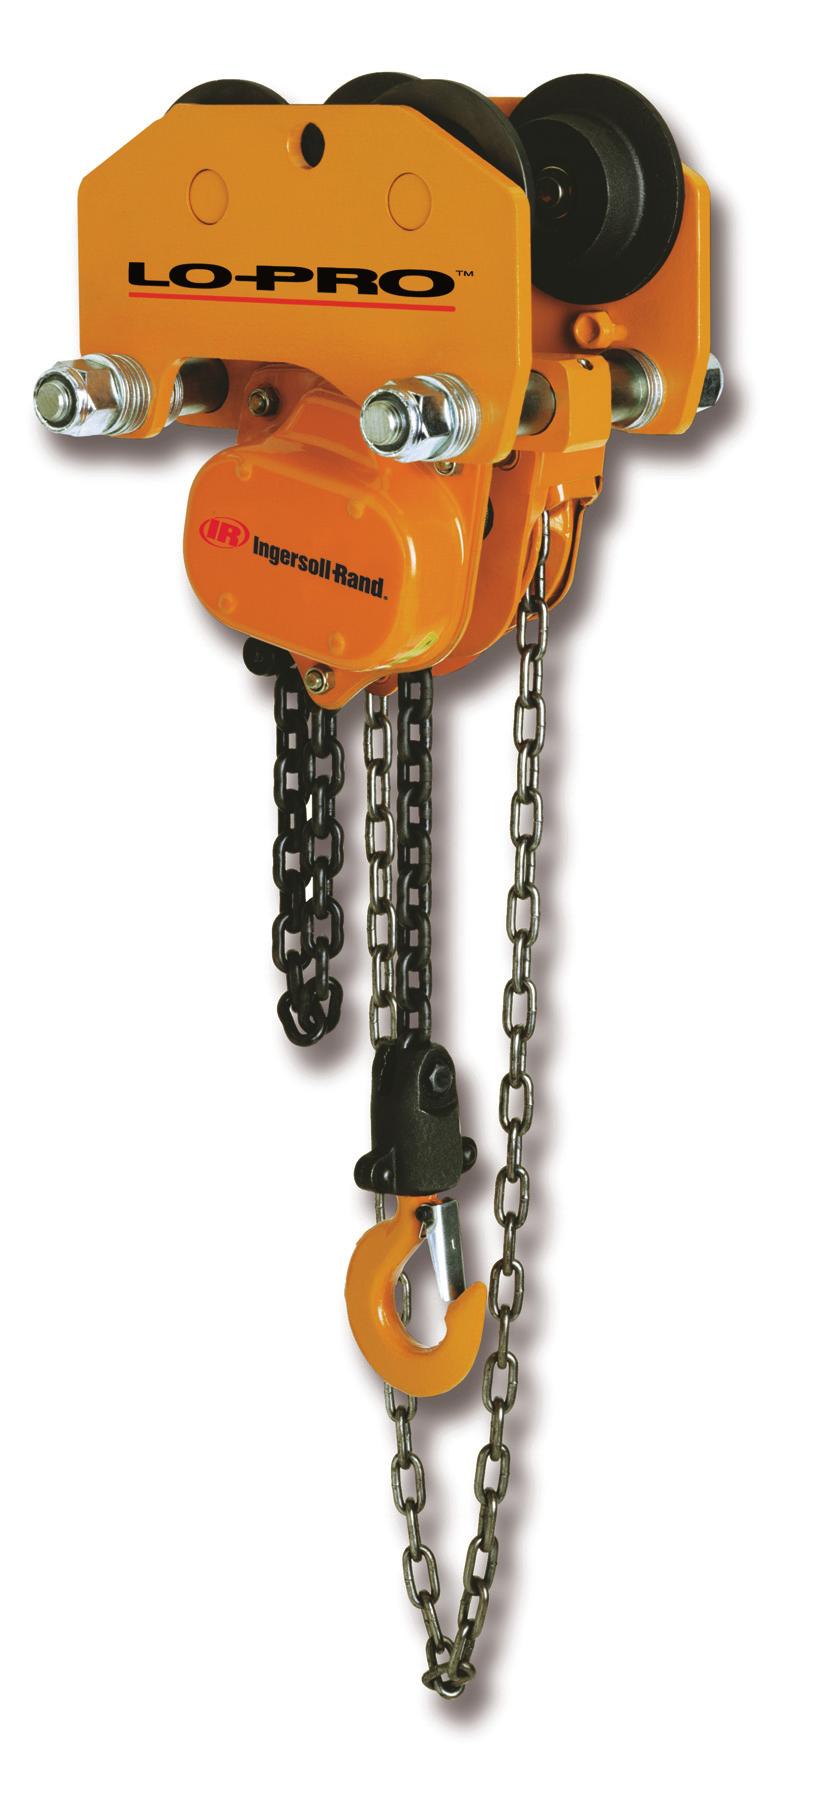 THV Lo-Pro Series Manual hain Hoist 1/2 10 metric ton Lifting apacity Low headroom rmy Style type trolley hoist Utilizes our premium VL2 hoist with a low profile trolley.